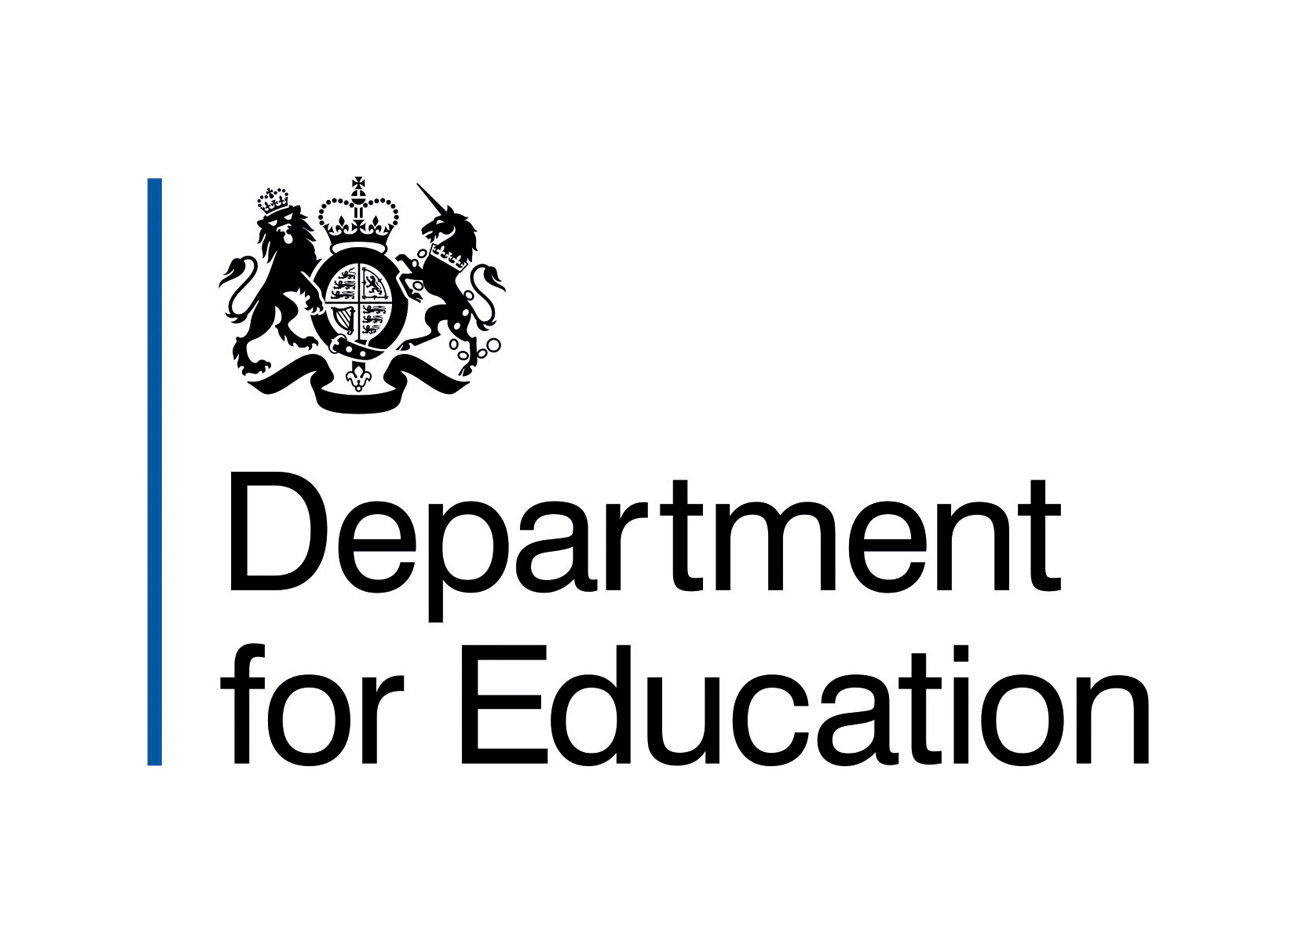 The Department for Education Logo